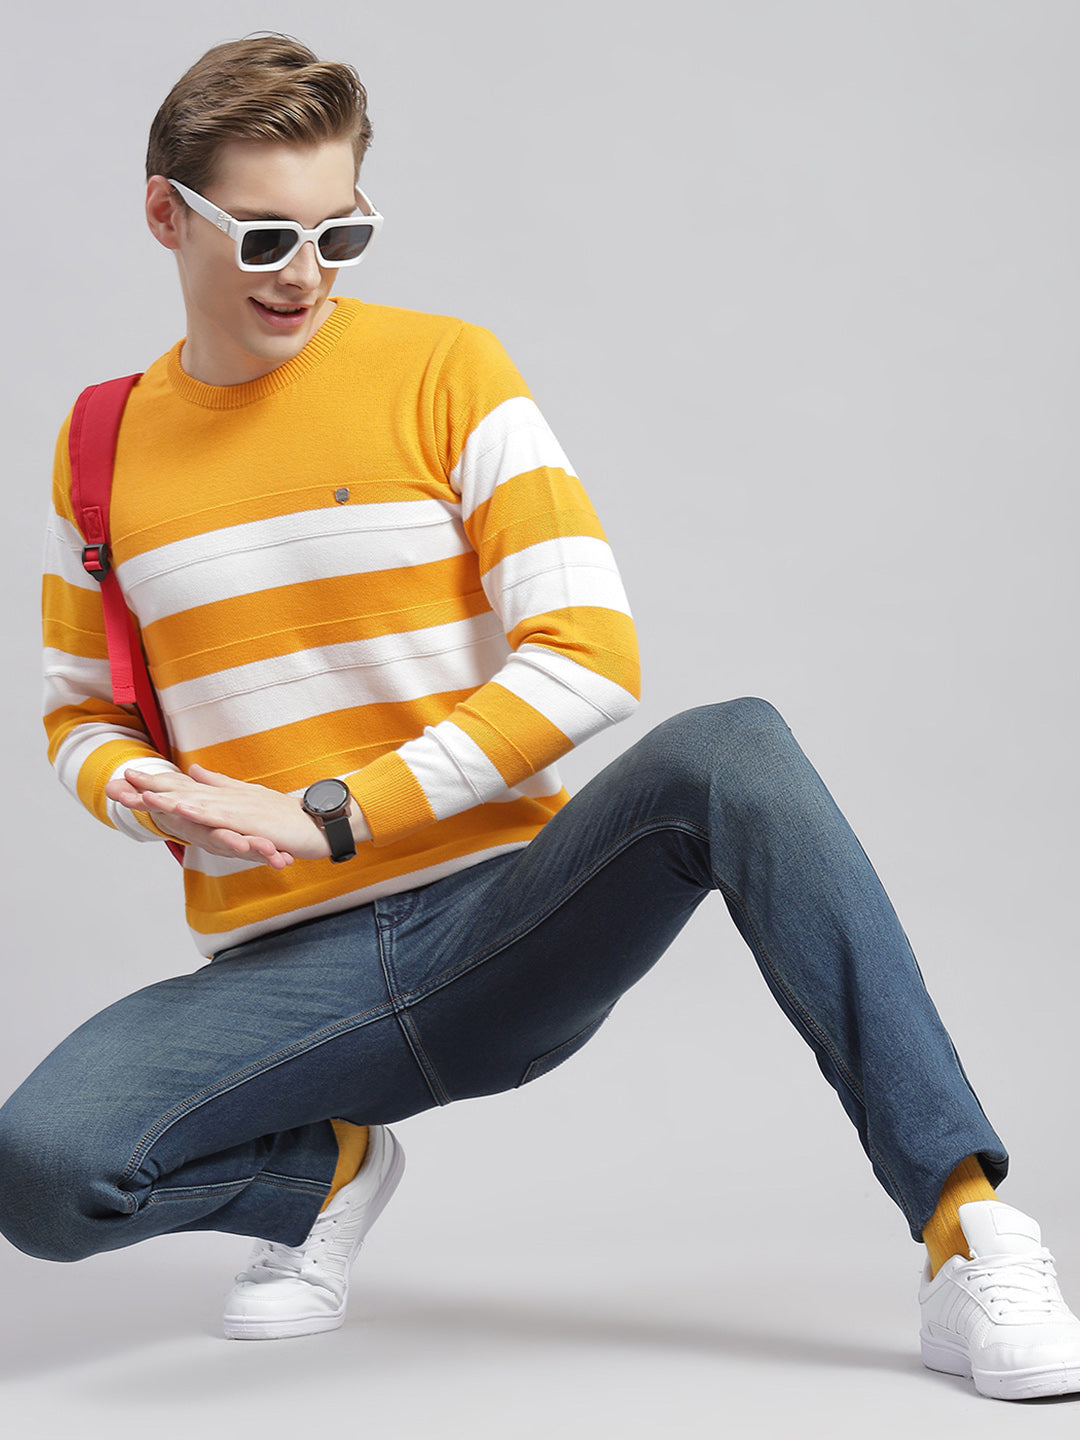 Men Yellow Stripe Round Neck Full Sleeve Sweaters/Pullovers